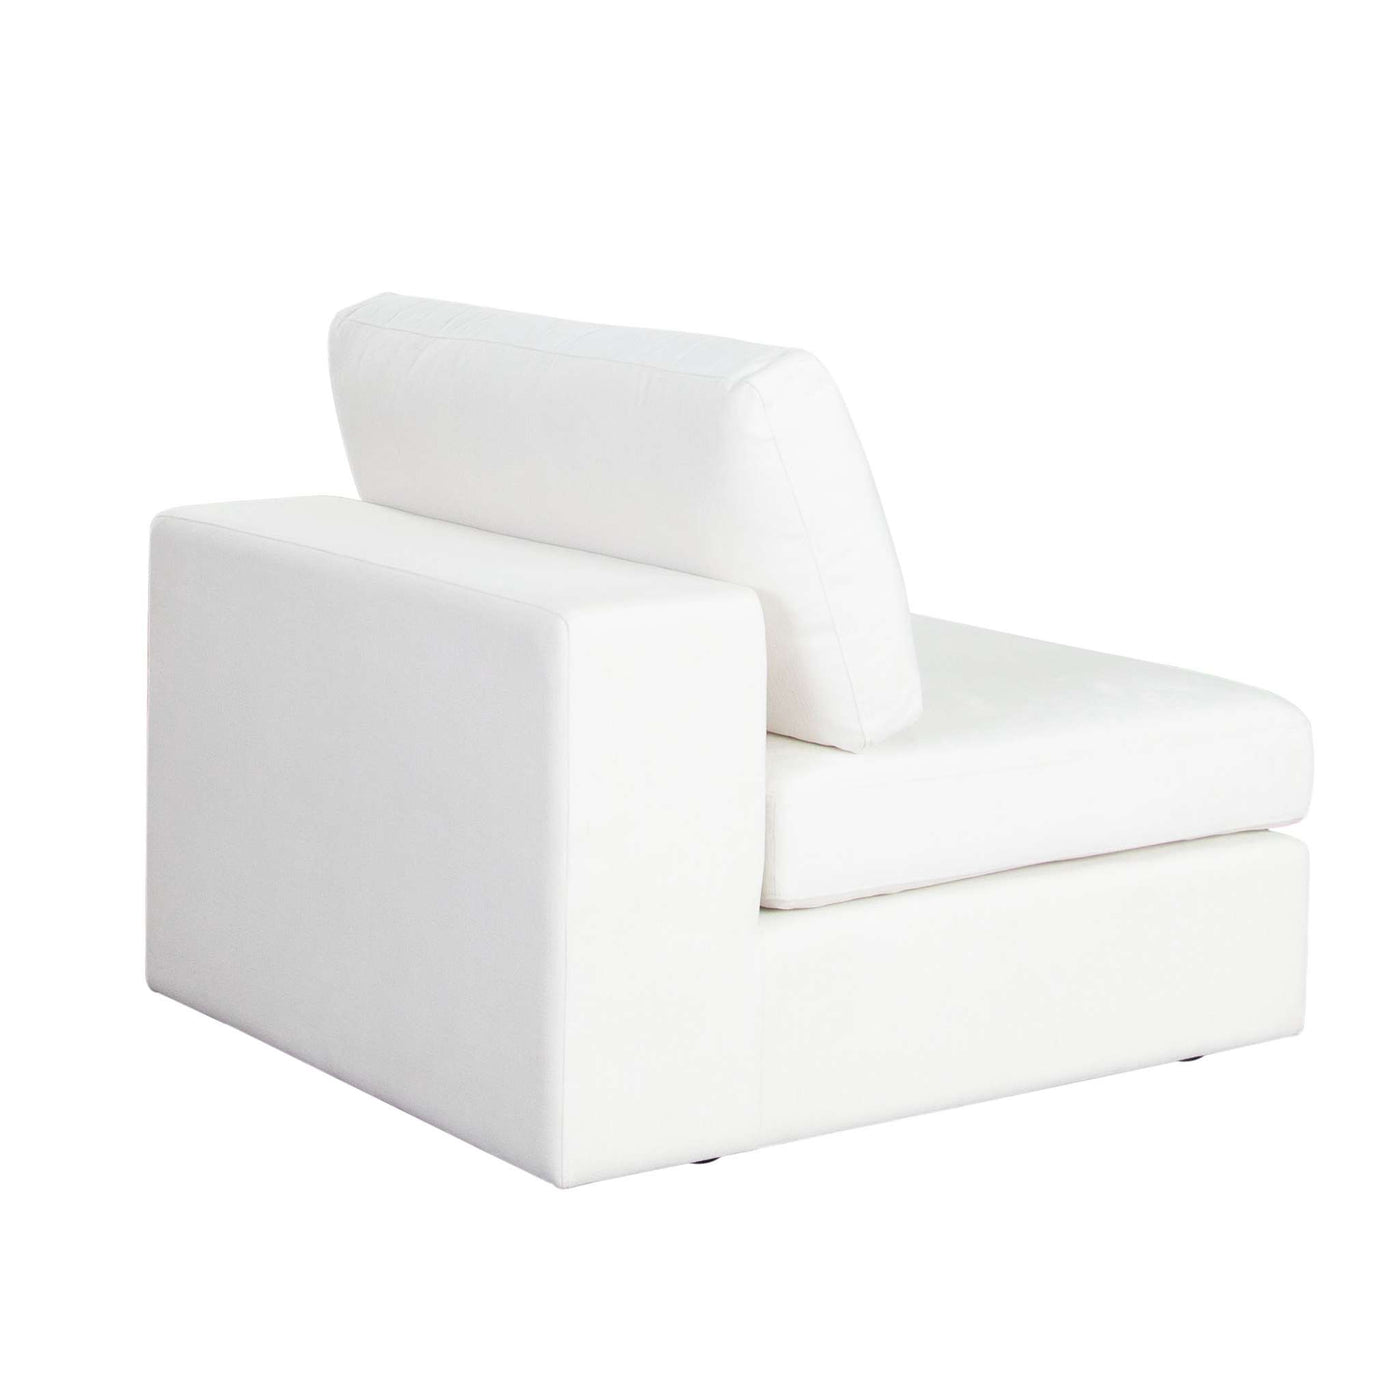 Muse Sofa in Mist White Performance Fabric w/ (4) Black Accent Pillows by Diamond Sofa